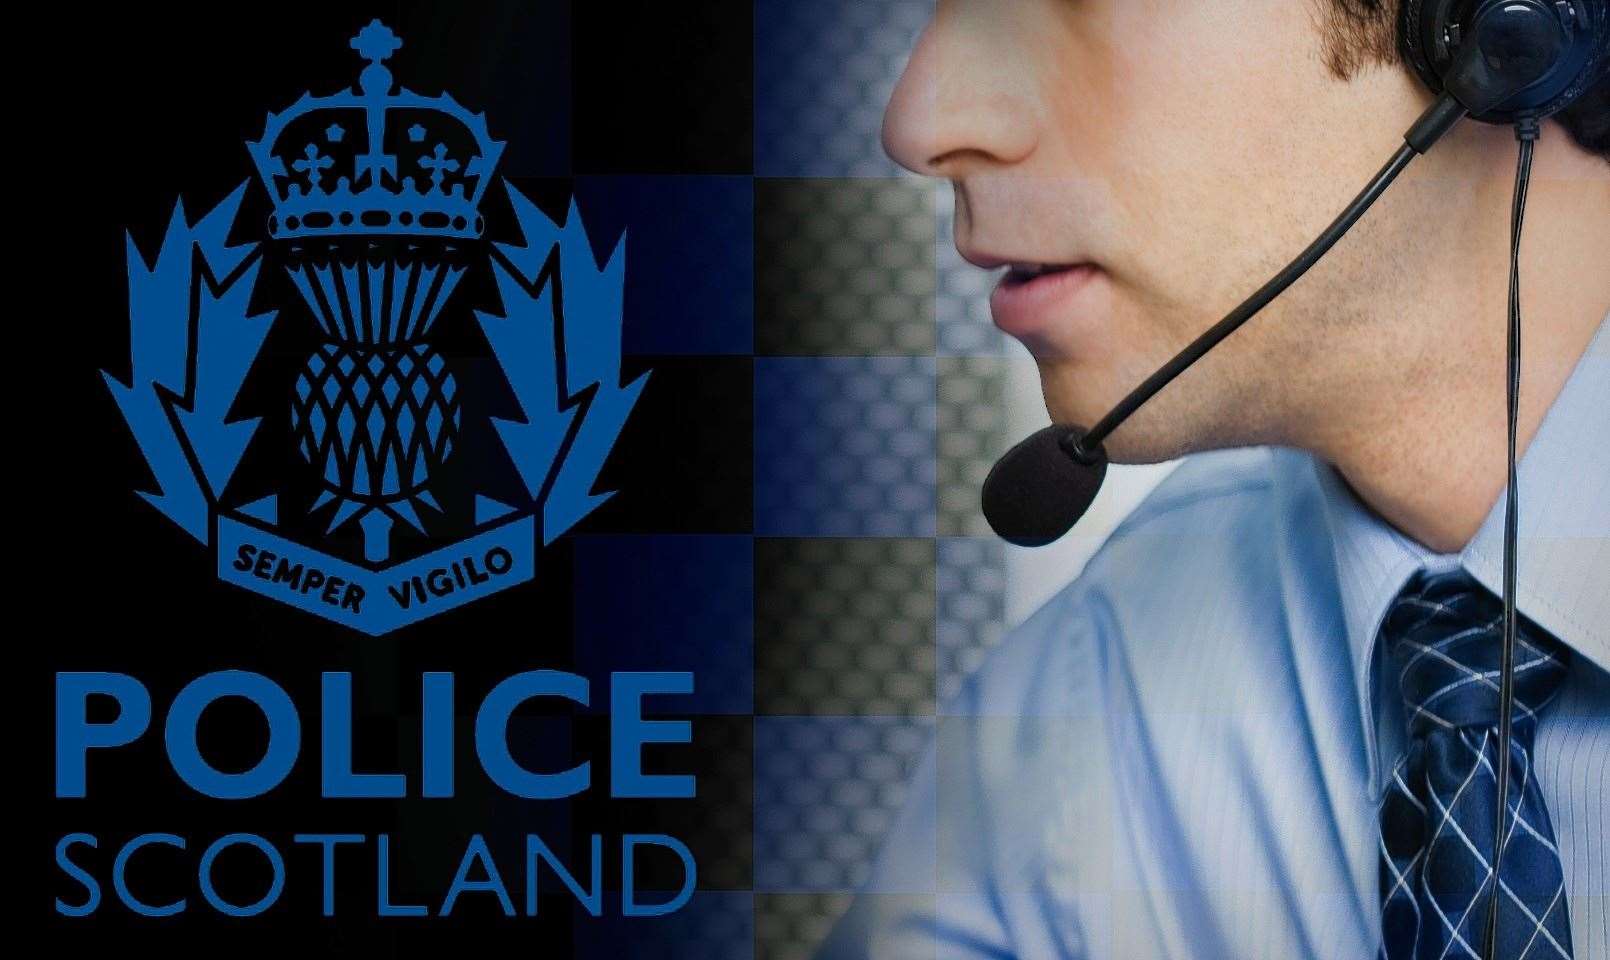 Police Scotland will be conducting street surgeries across the Inverness area over the summer.